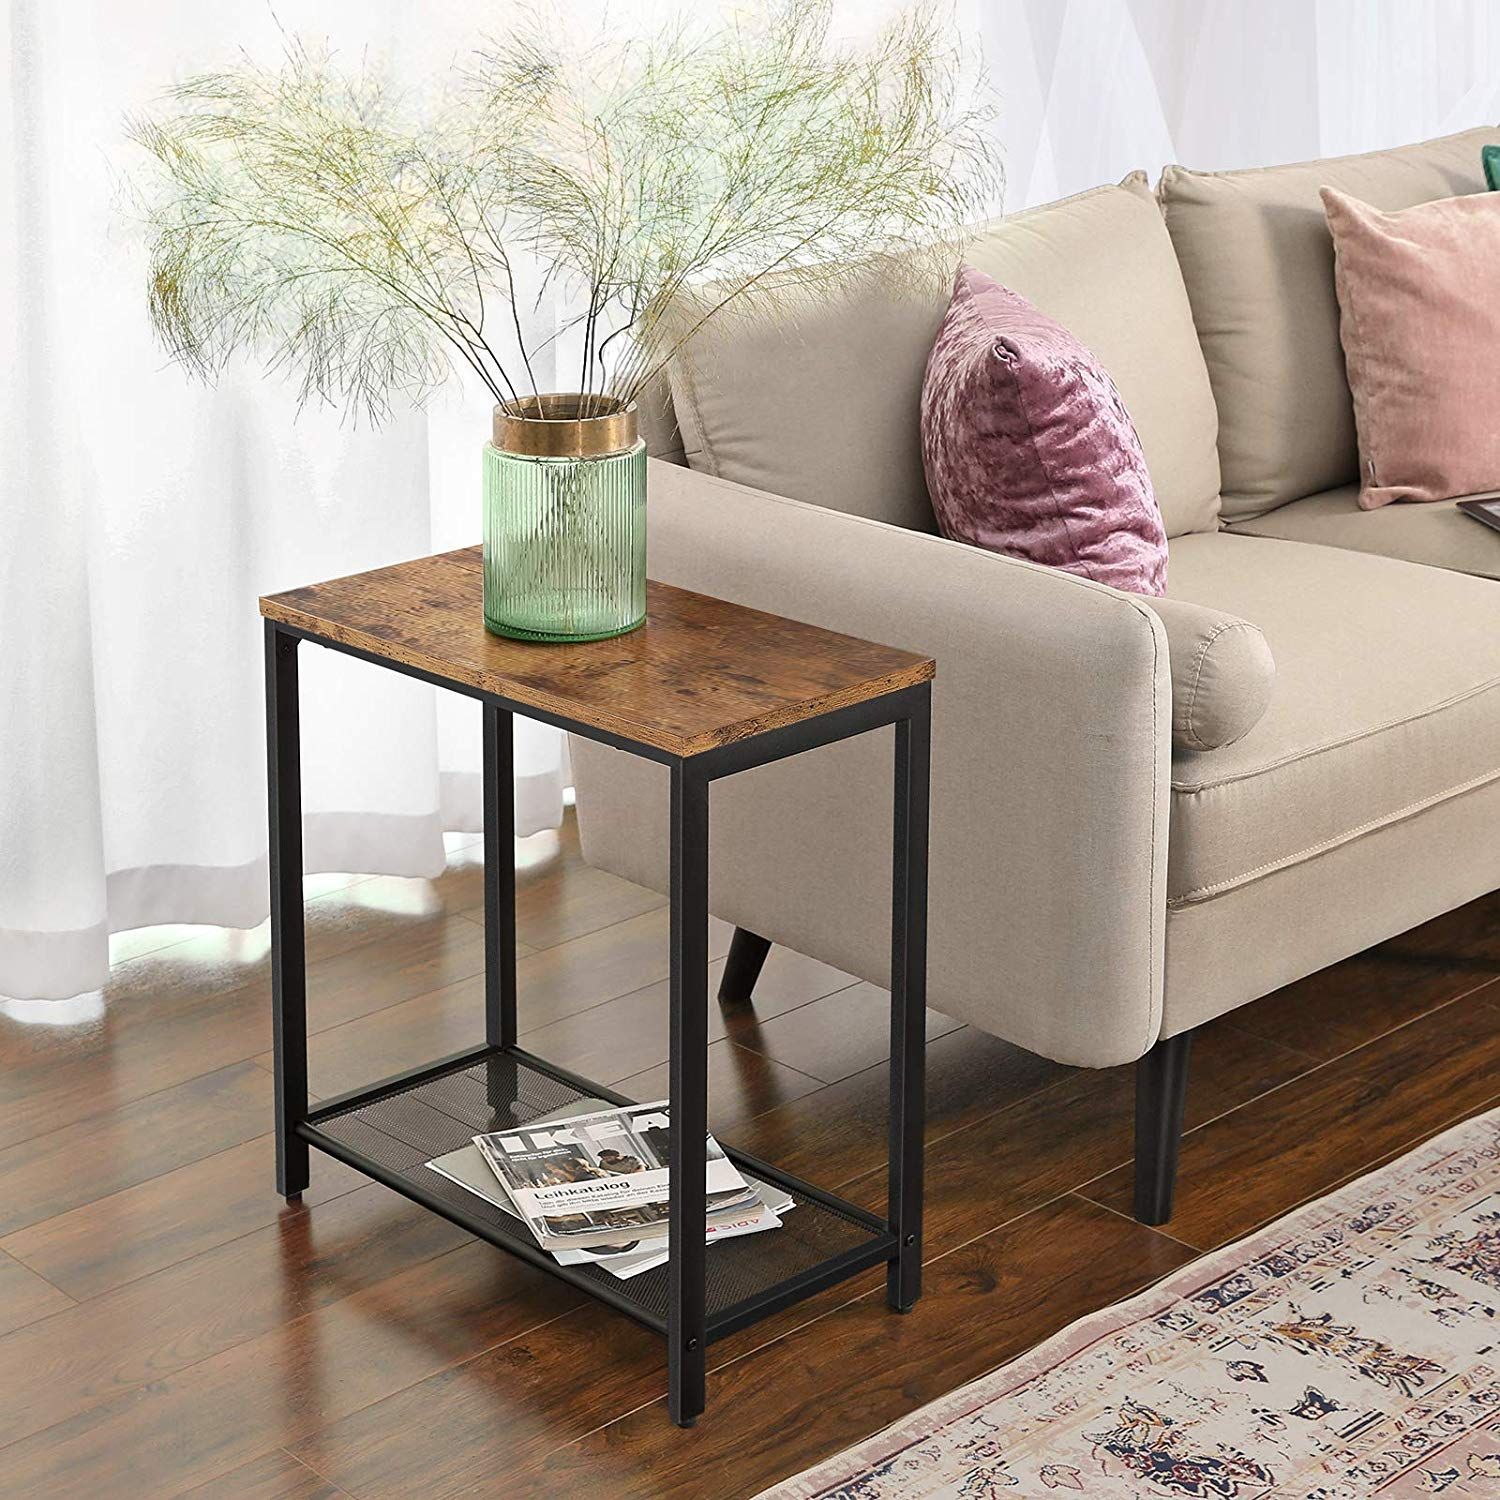 Room And Board Metal Side Tables – Kif Profile Photo Gallery With Metal Side Tables For Living Spaces (View 14 of 15)